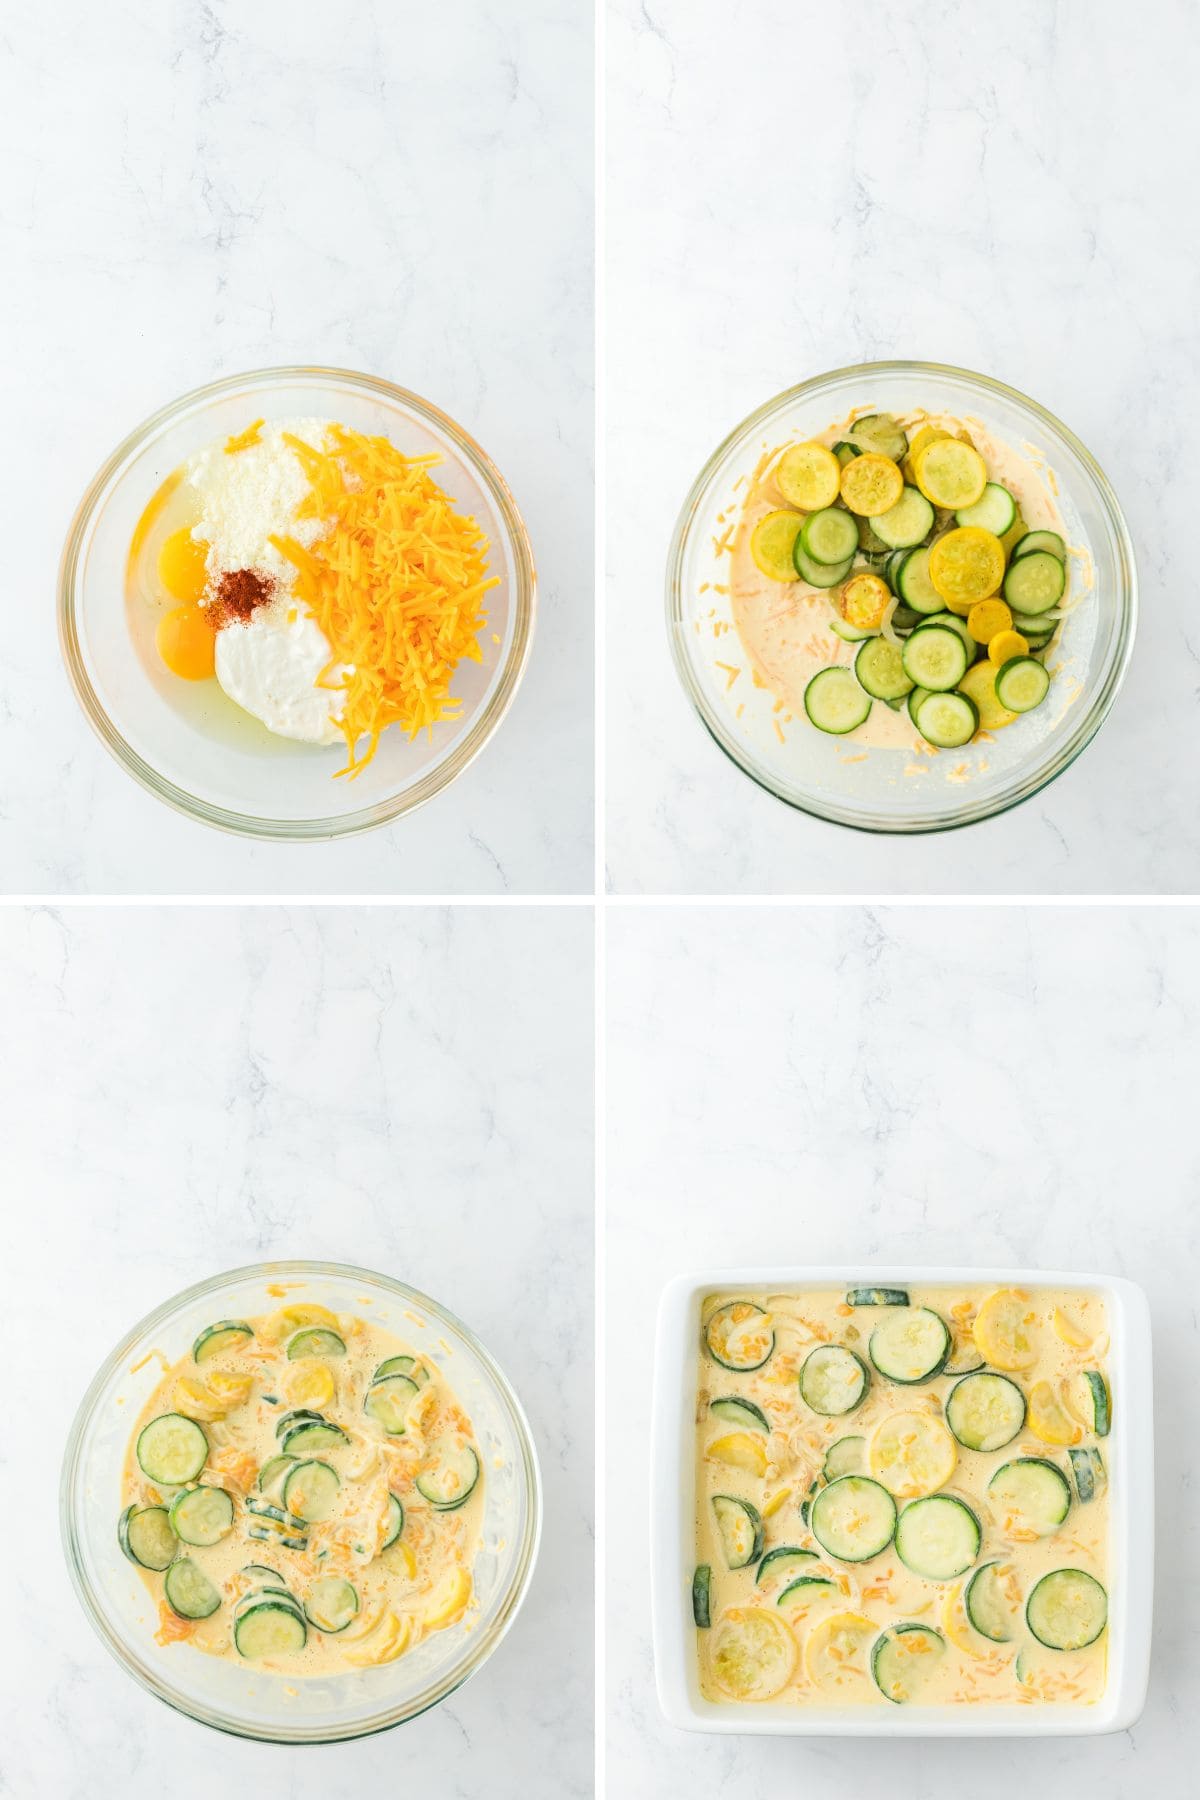 A step by step image collage on how to make squash casserole, with mixing the rest of the casserole ingredients with the veggies, and pouring the mixture on the baking dish